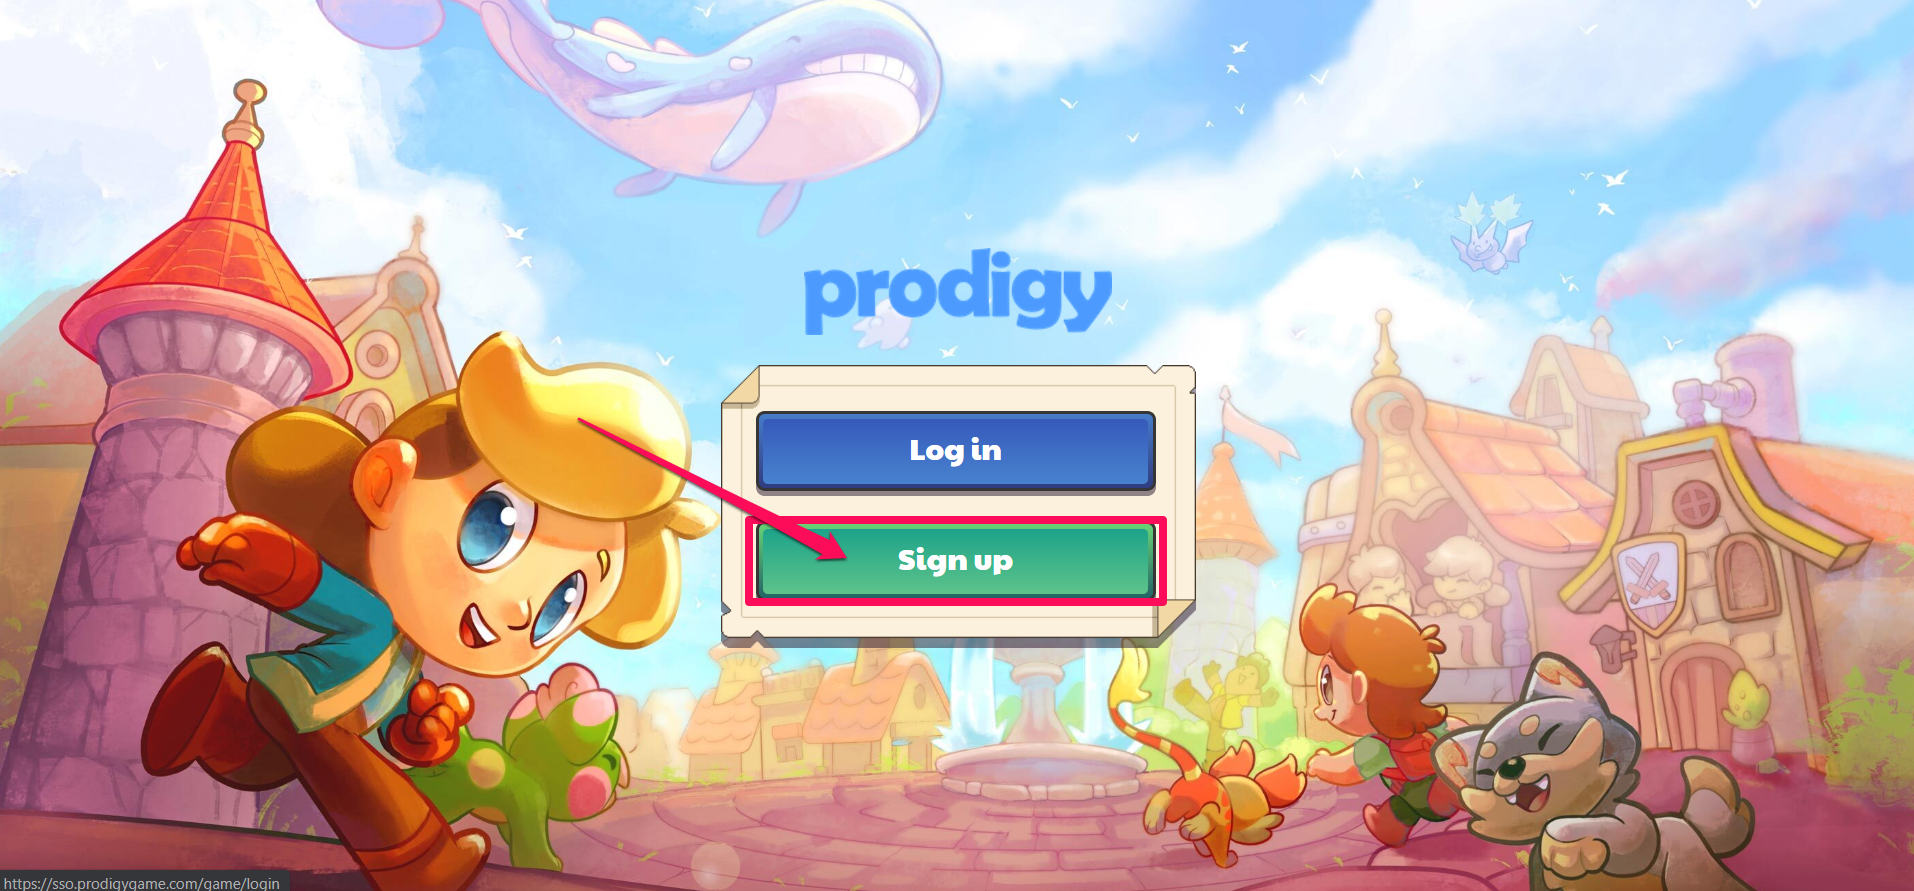 how to get free membership on prodigy 2019